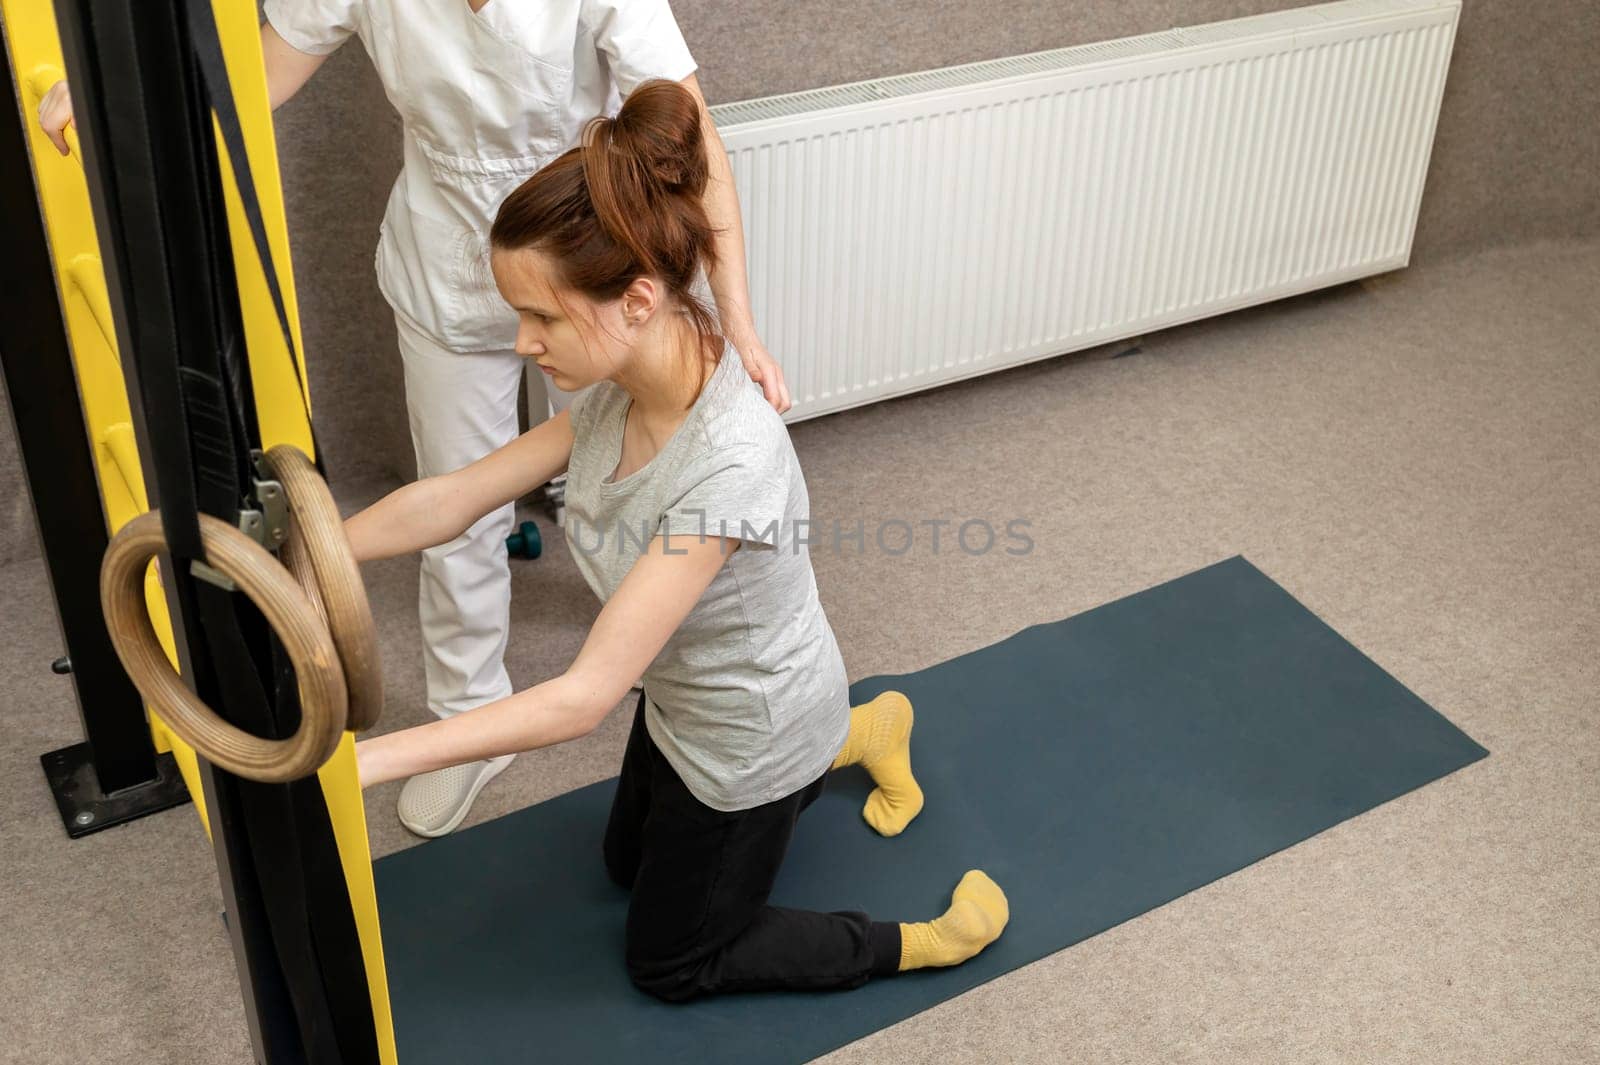 Disabled Child With Physician Does Physical Exercises In Gym. Kid With Special Needs. Rehabilitation. Cerebral Palsy. Motor Disorder. Horizontal plane. High quality photo